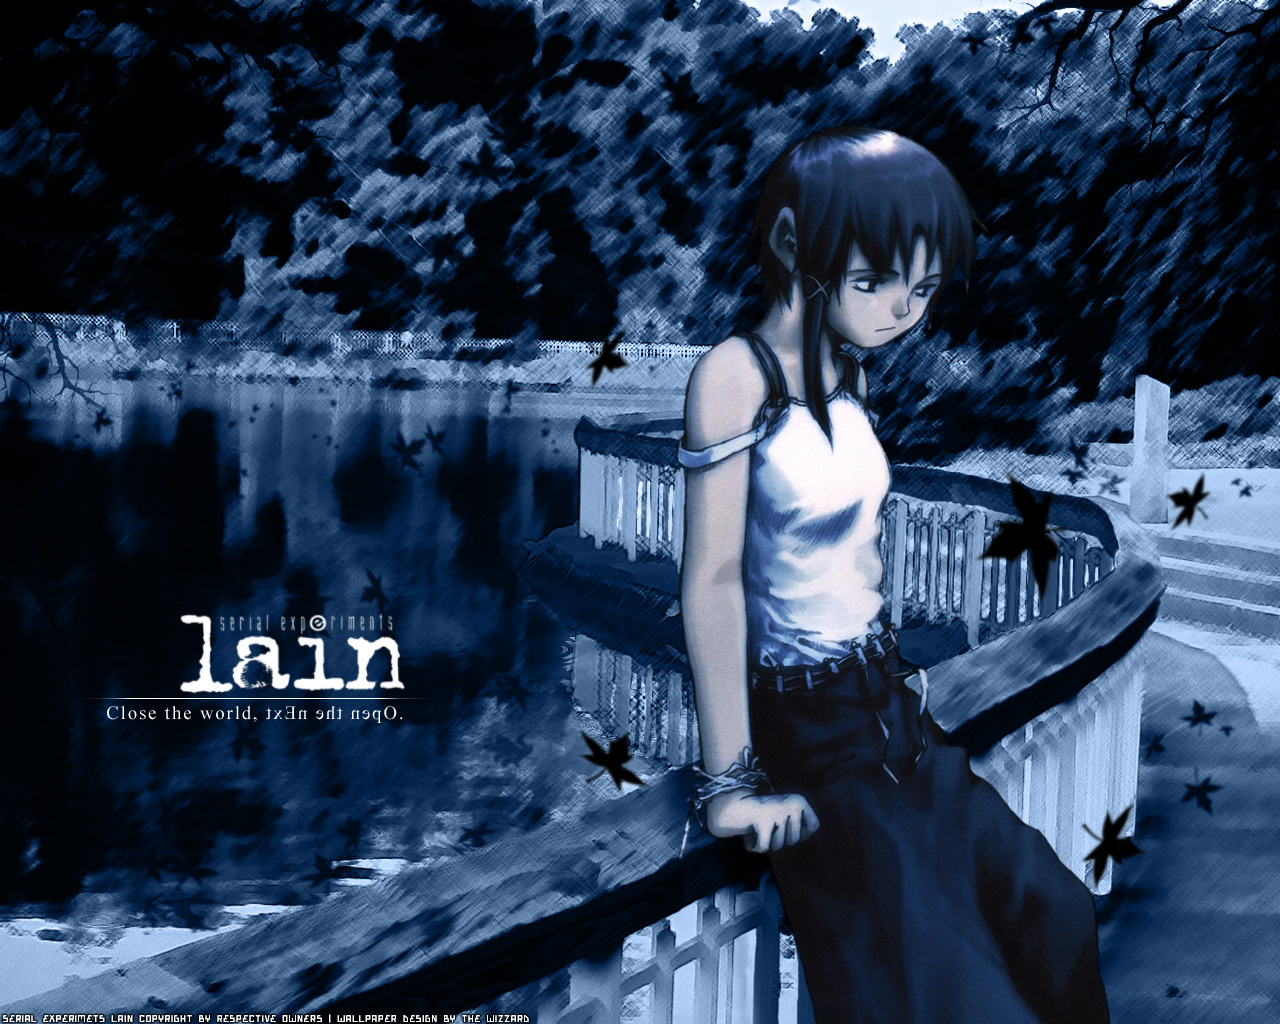 Anime Serial Experiments Lain Picture by Yoshitoshi Abe